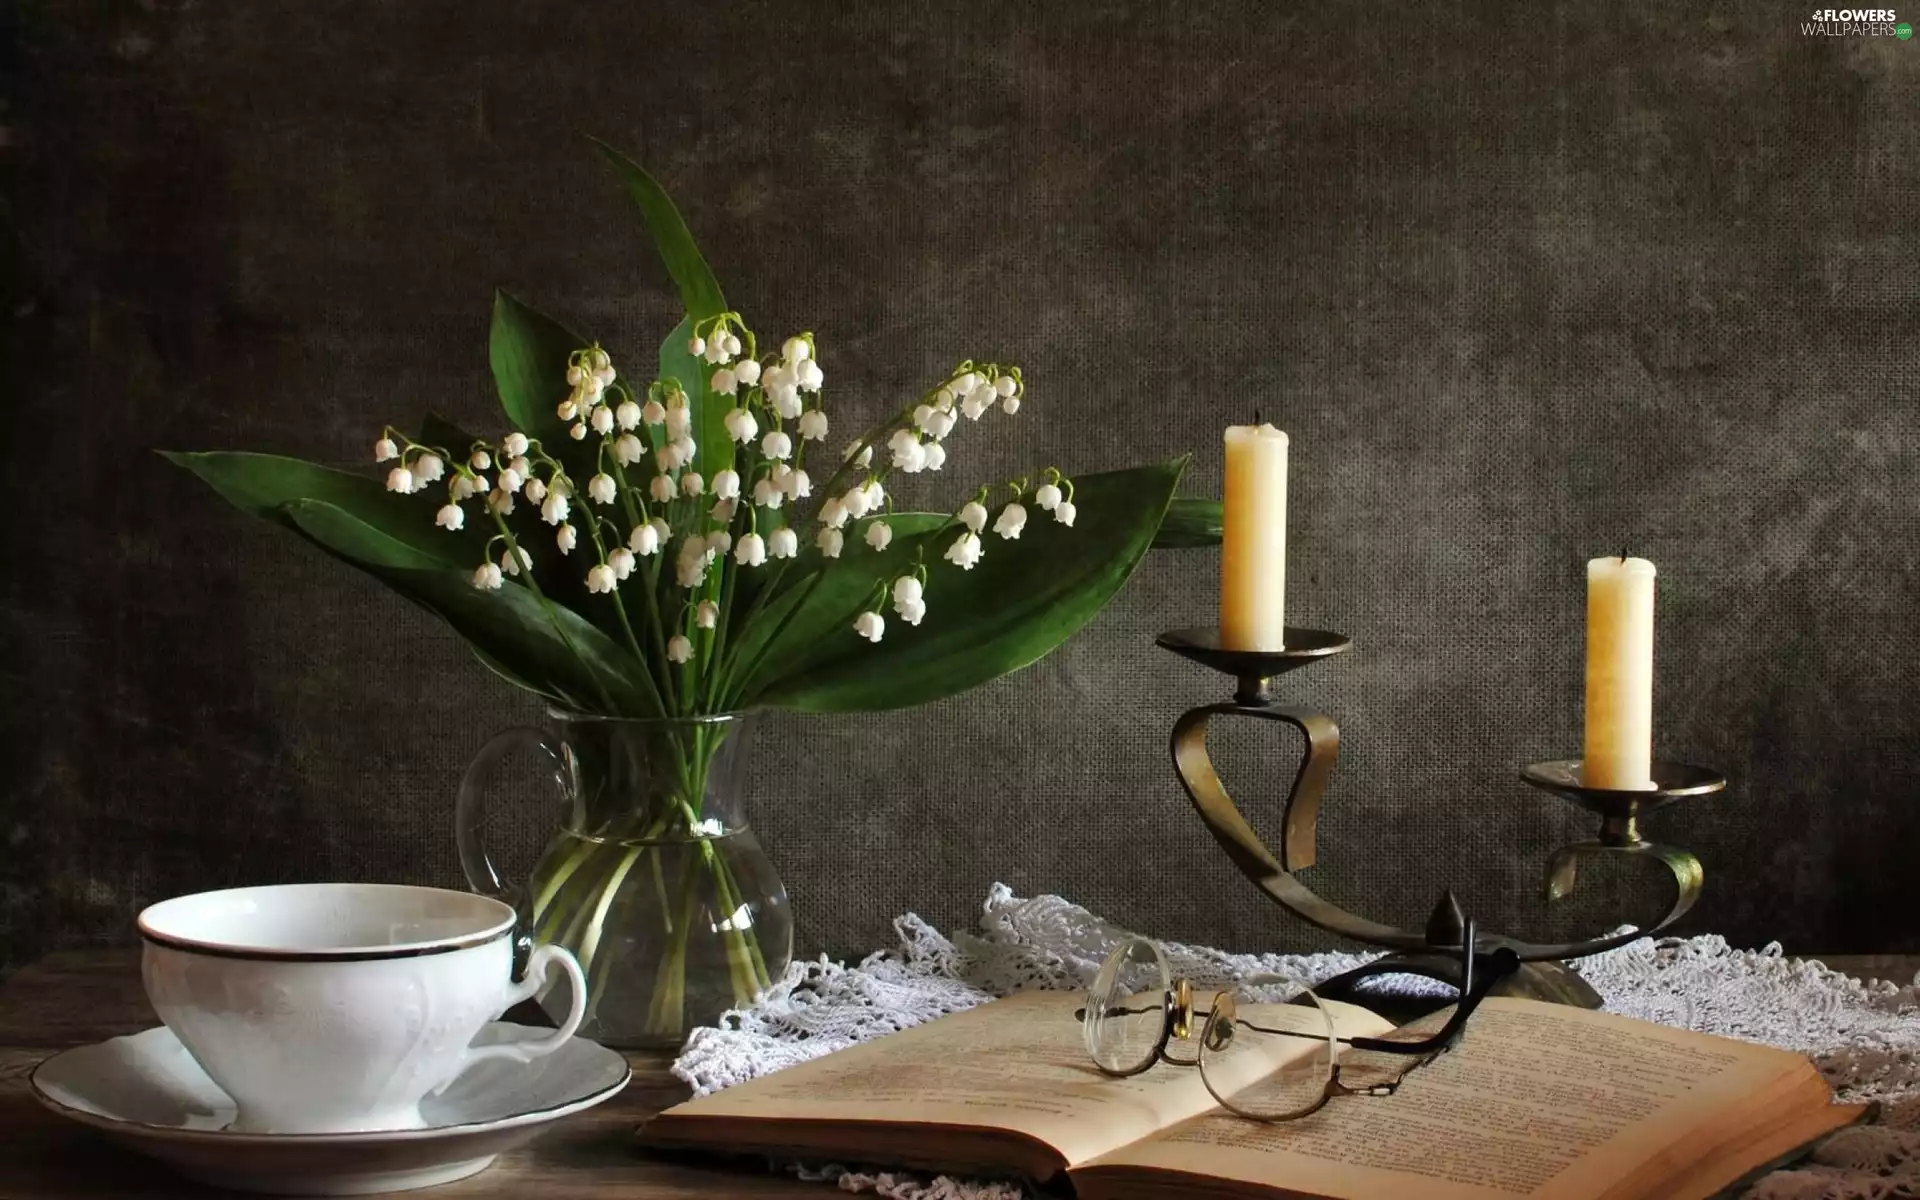 lilies, Glasses, candlestick, Book